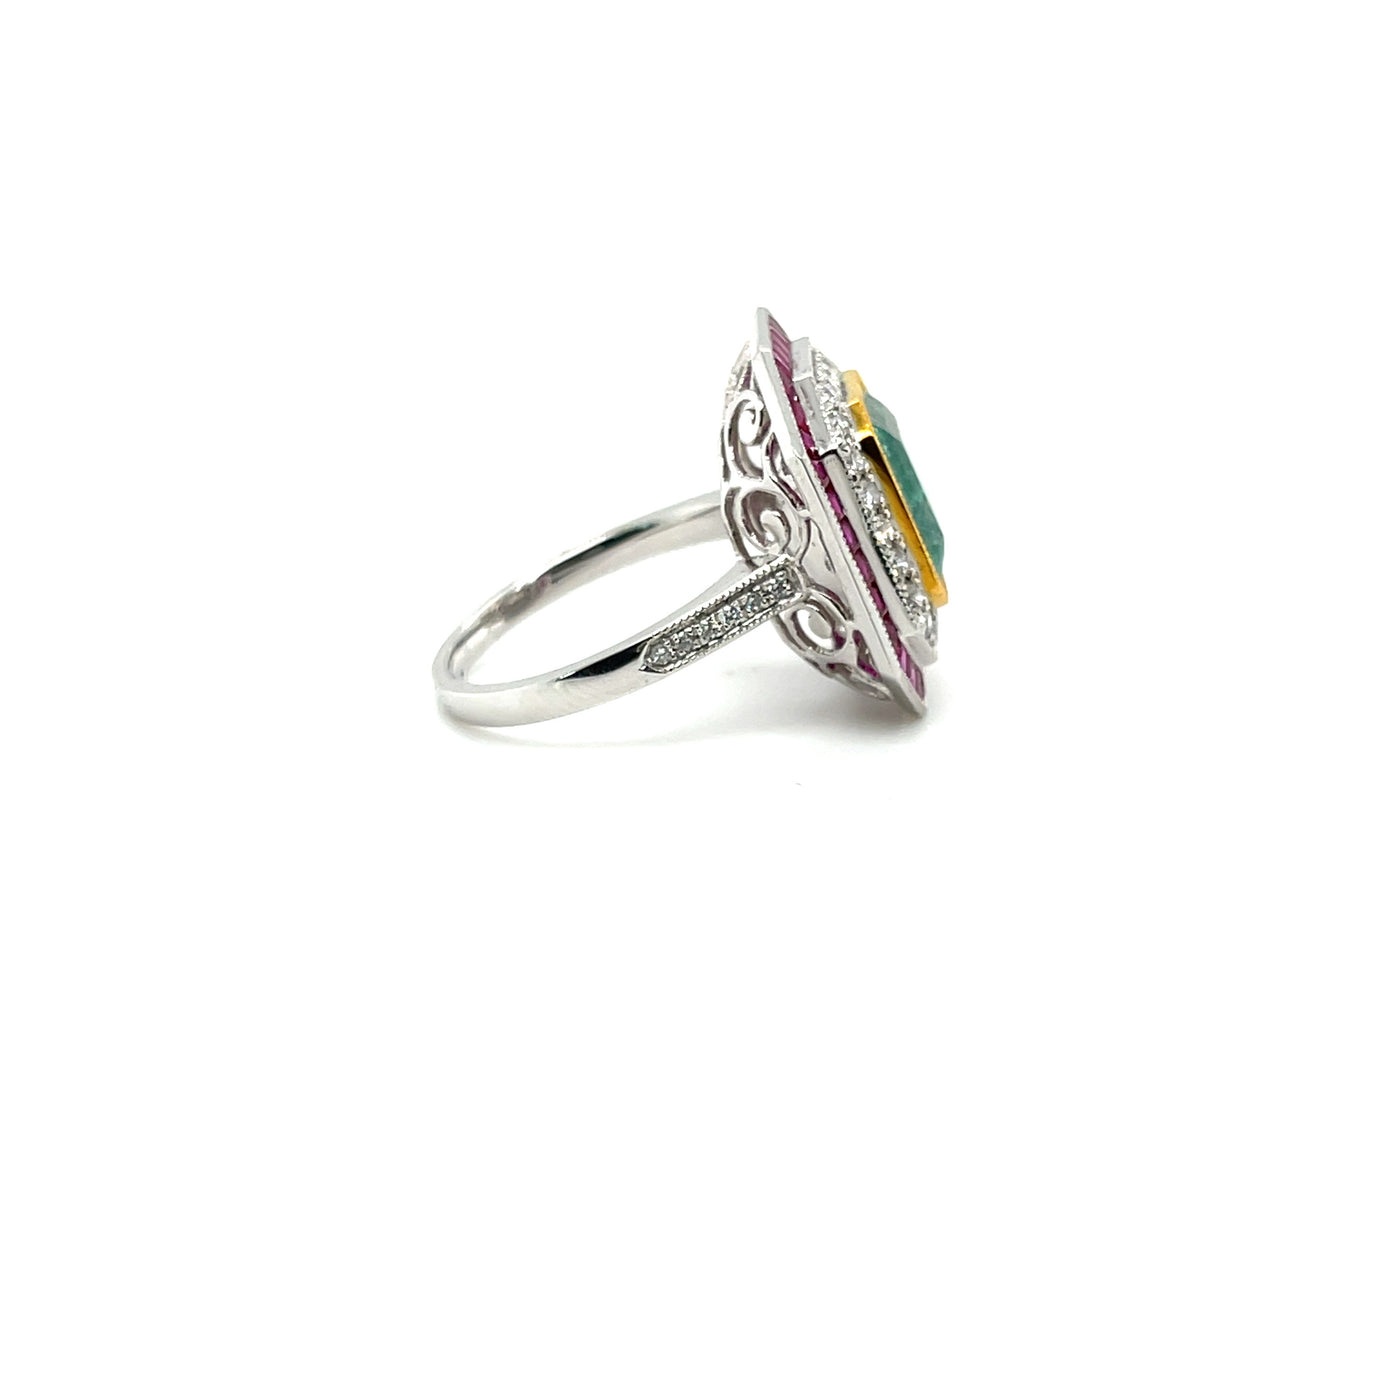 Platinum, Emerald, Ruby and Diamond cocktail ring